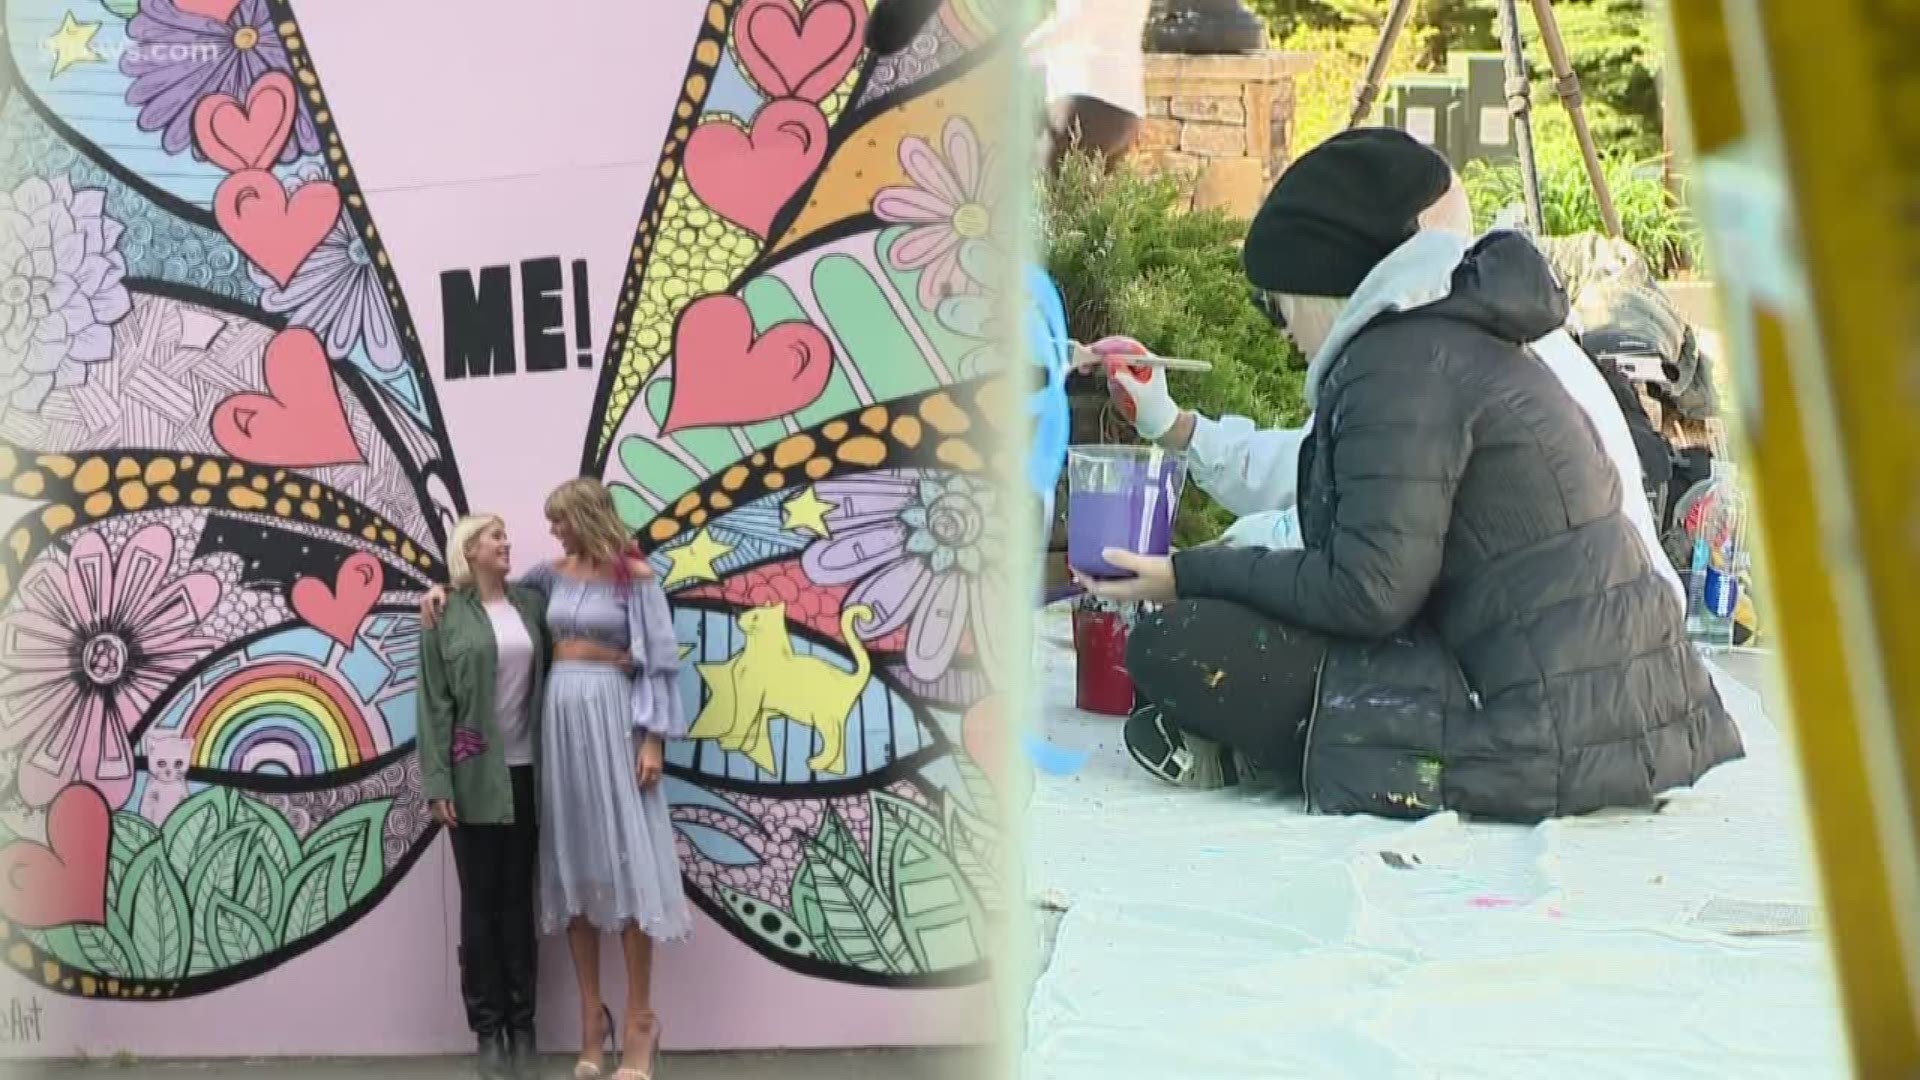 Kelsey Montague is a street artist whose work was recently featured by Taylor Swift. Her most recent mural is going up in Vail.